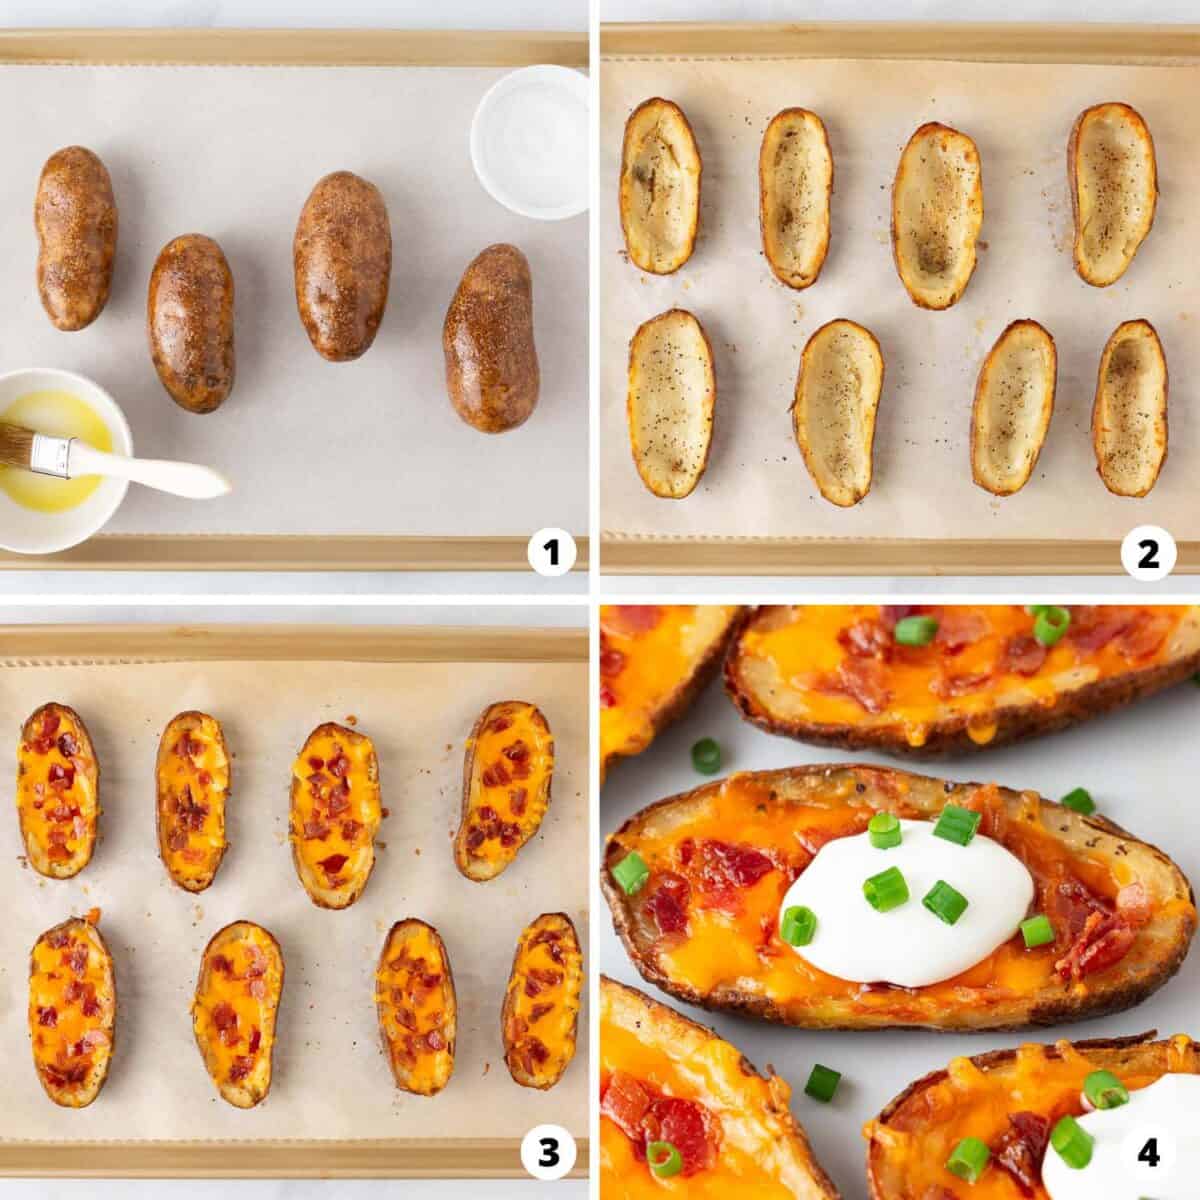 Showing how to make potato skins in a 4 step collage.